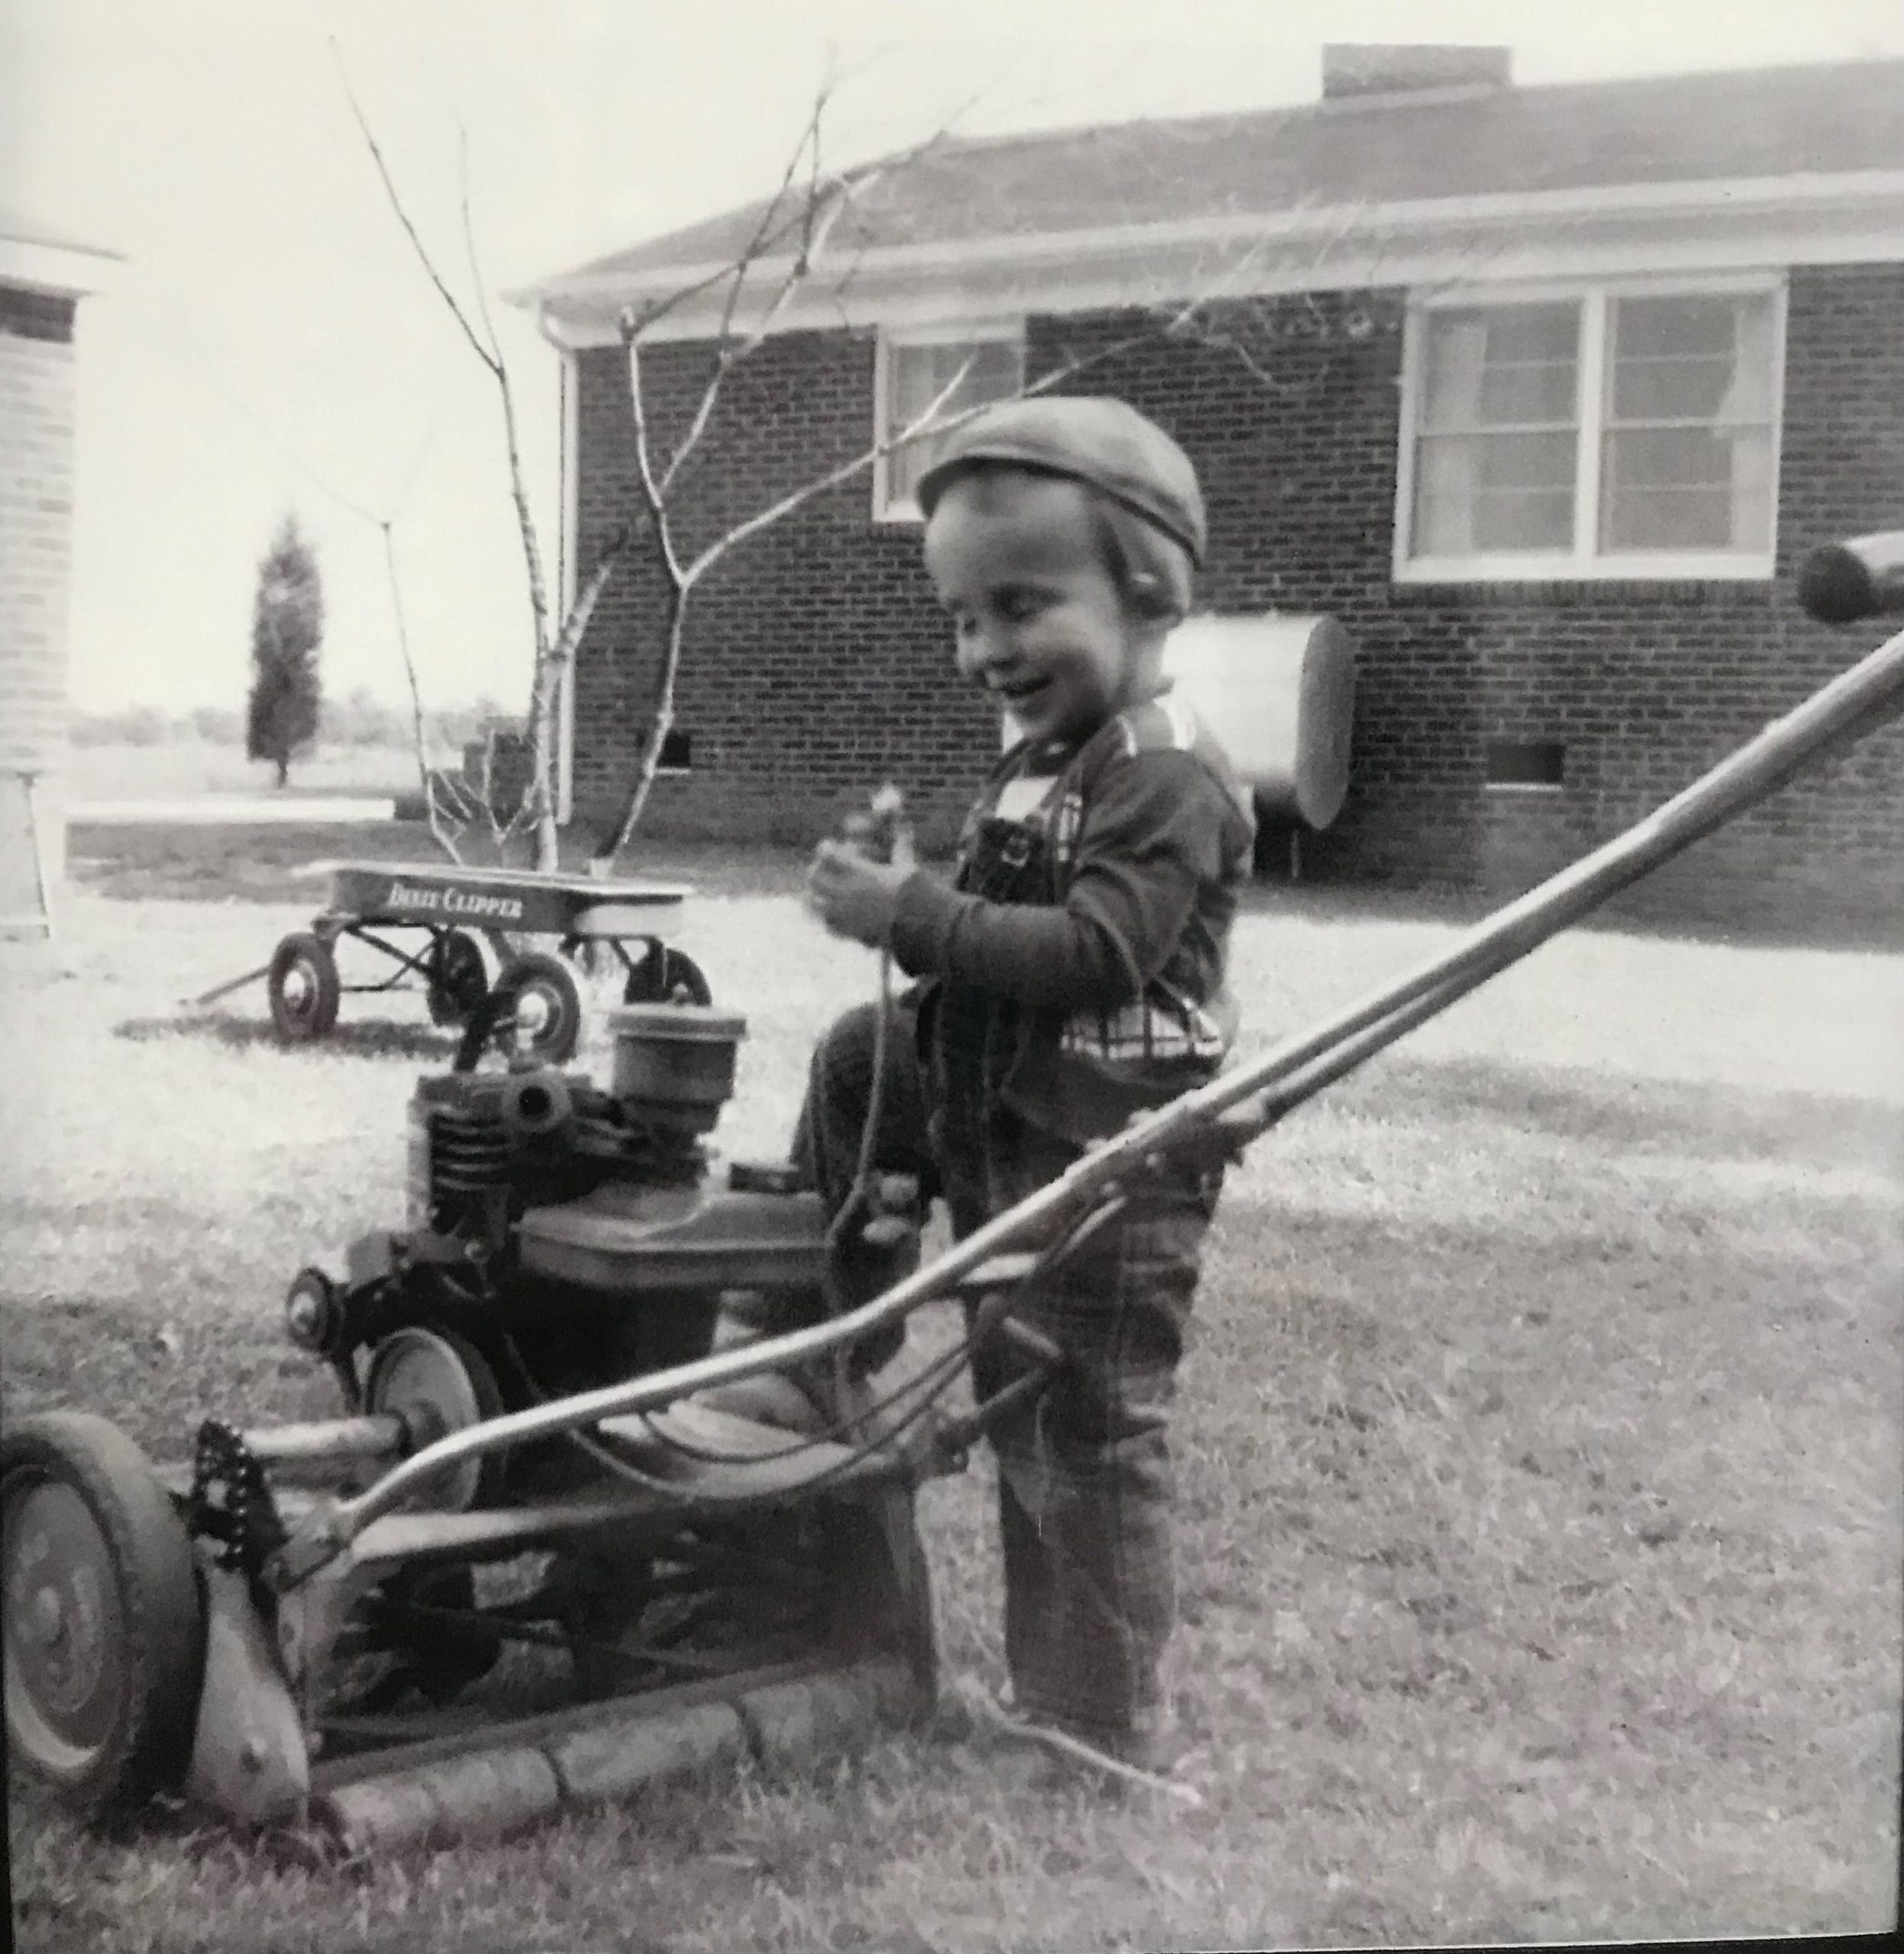 The Little Mower that Shaped Lives